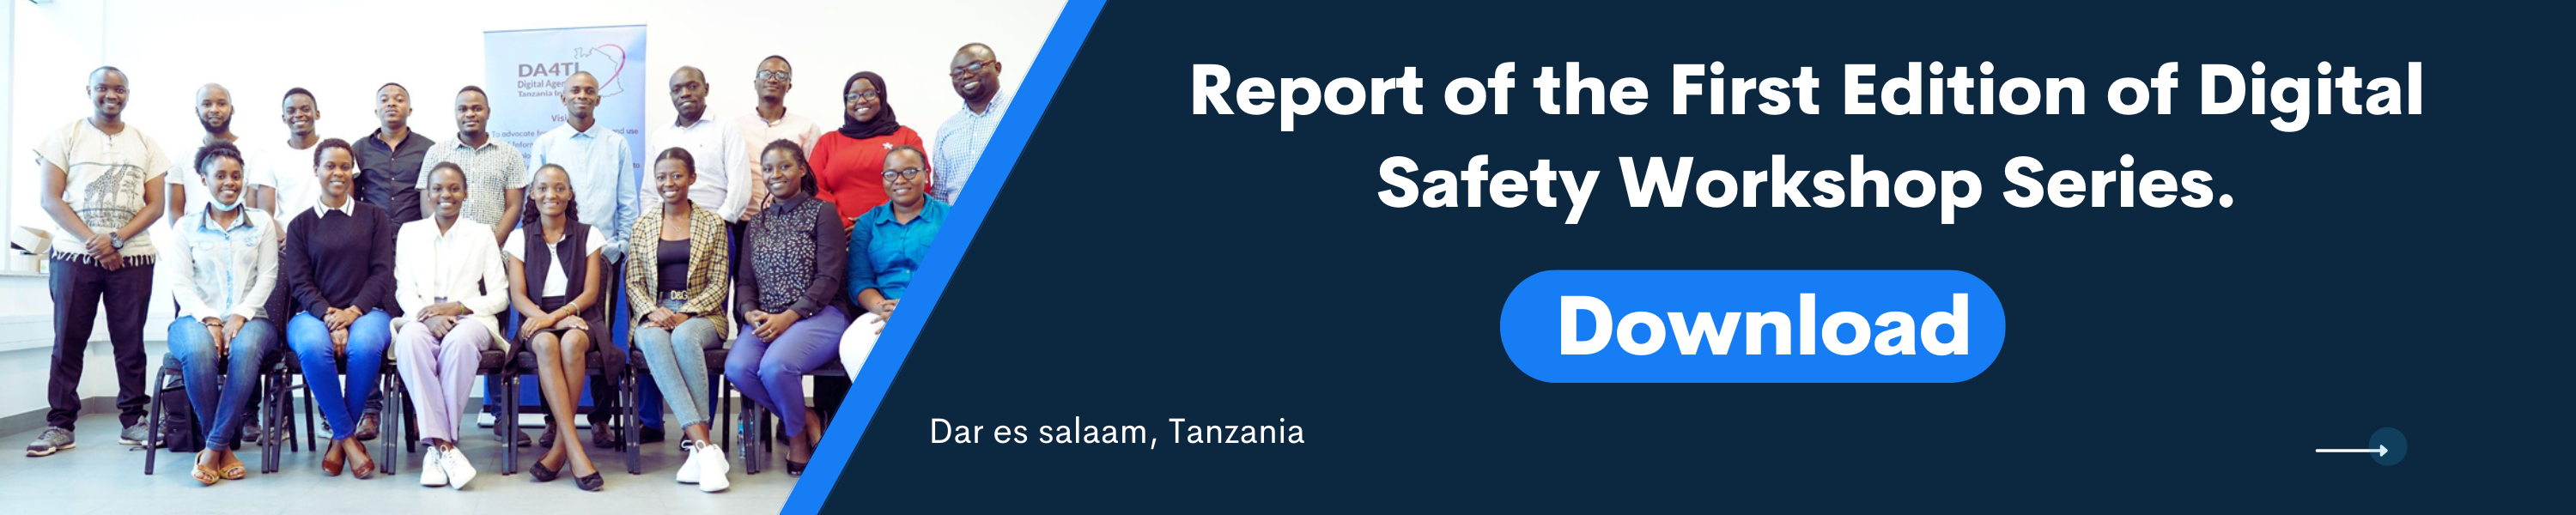 Report of the First Edition of Digital Safety Workshop Series.